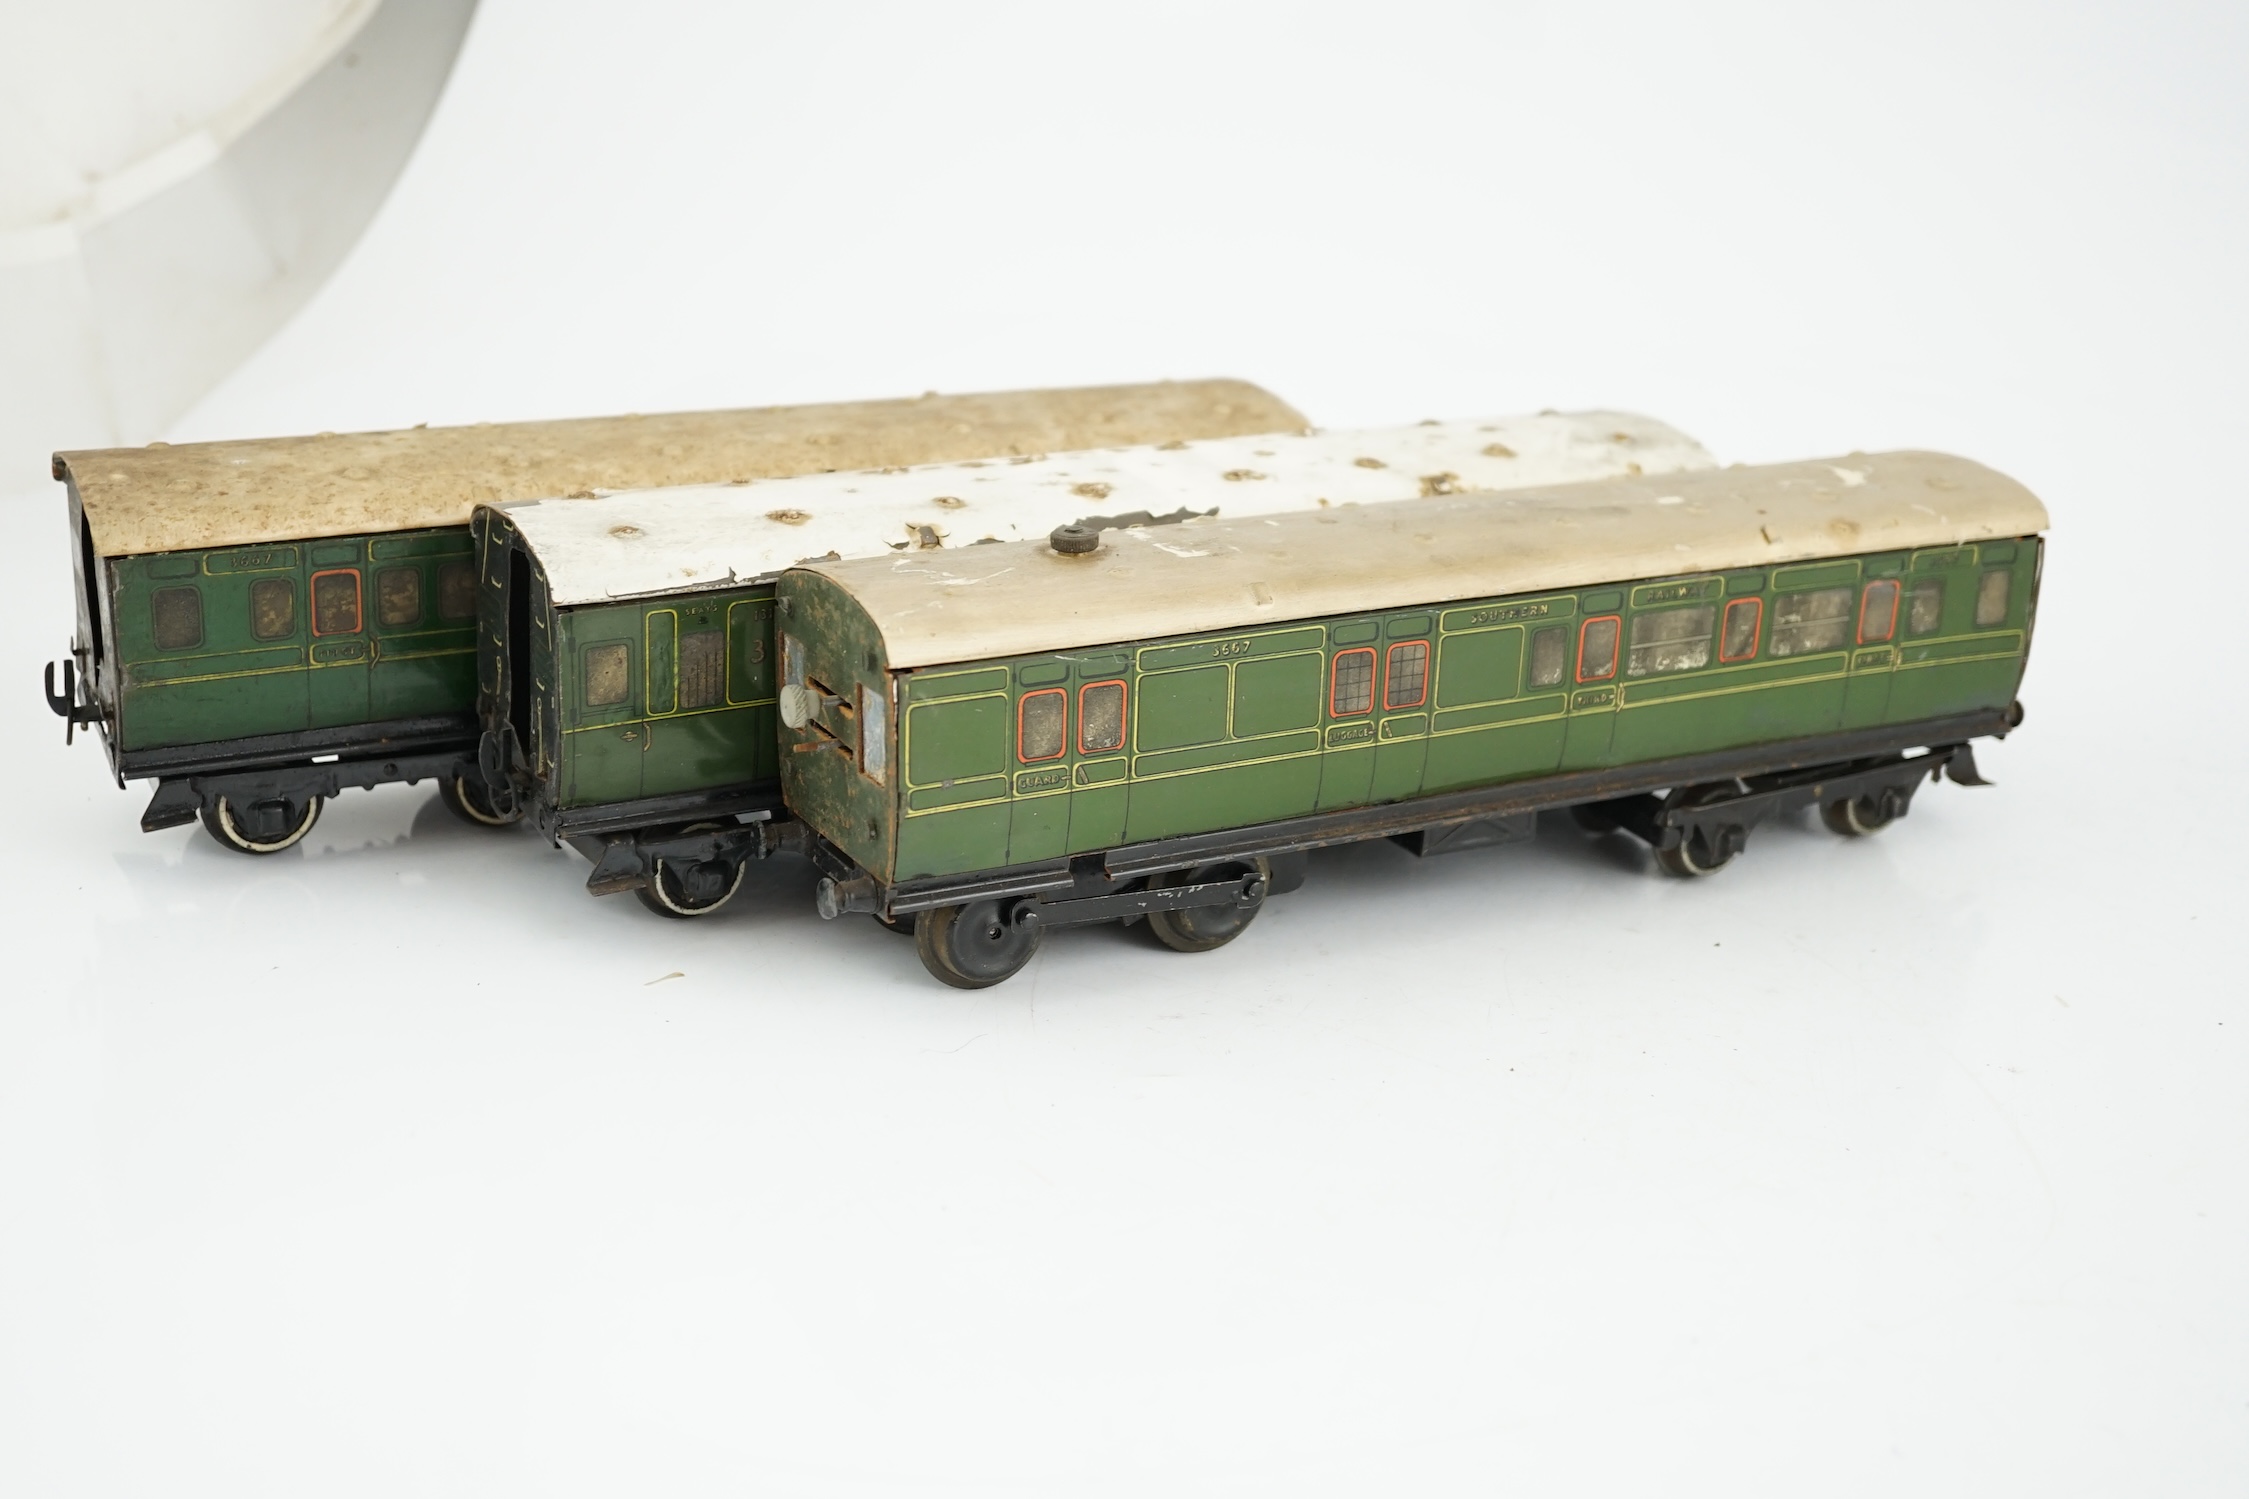 Six Hornby 0 gauge tinplate No.2 coaches in Southern Railway livery, one coach adapted to a - Image 12 of 12